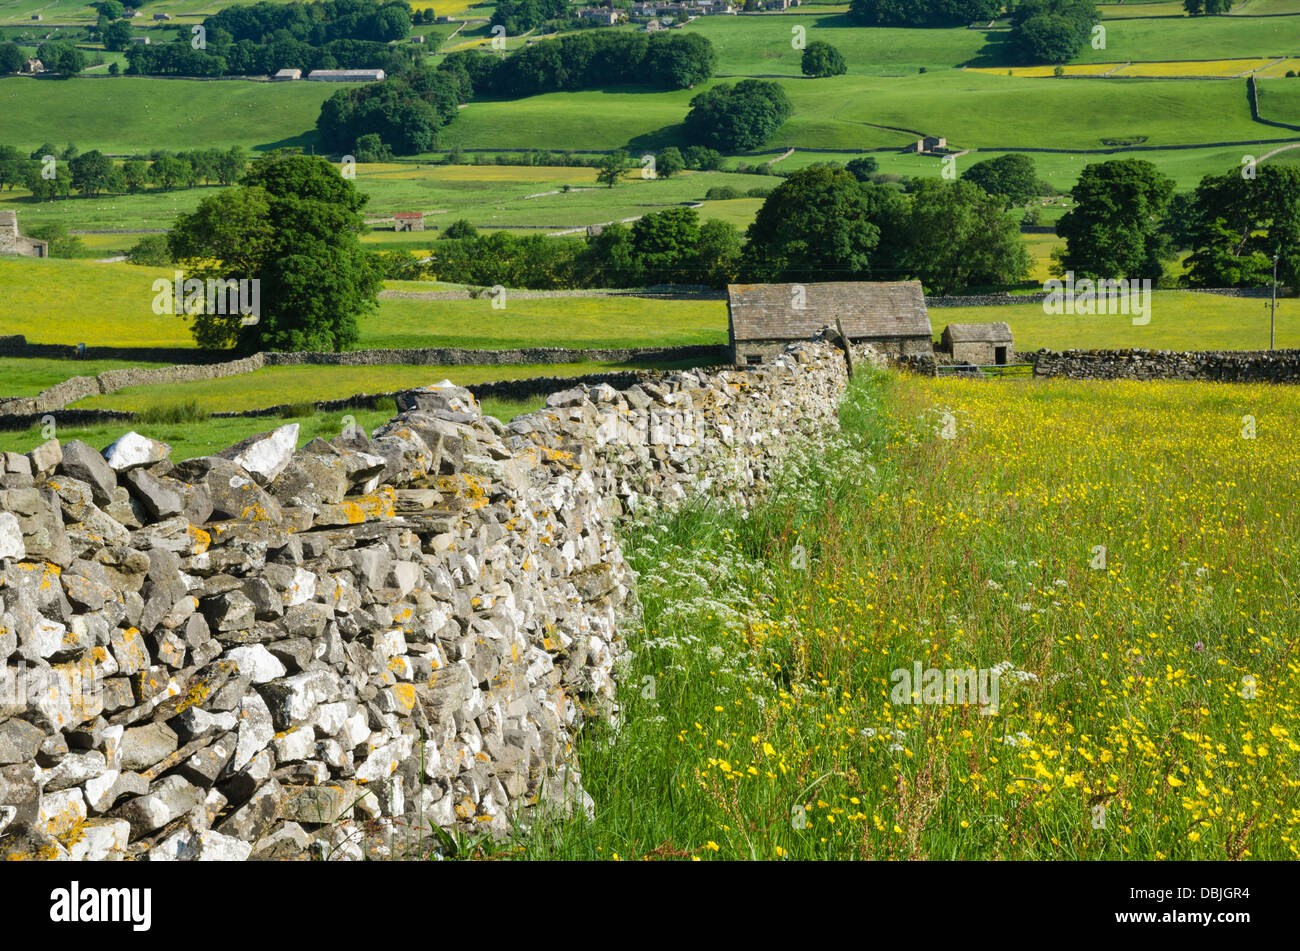 View of Wensleydale during summer Stock Photo